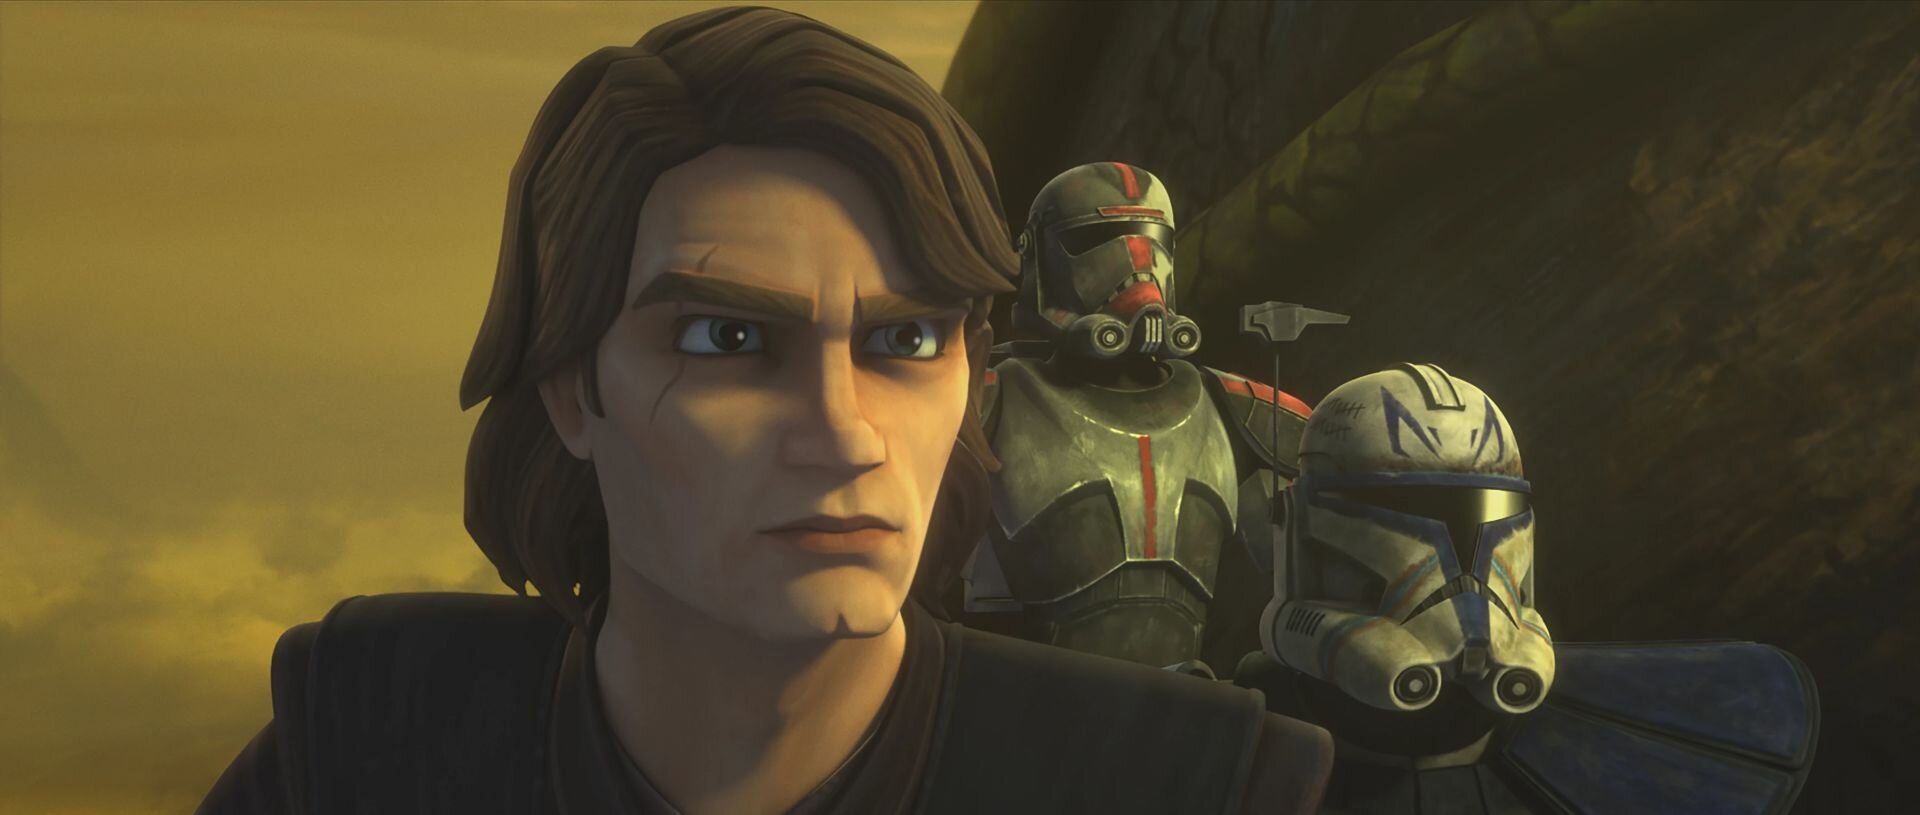 Let S Talk About The Clone Wars Season 7 Episode 9 Old Friends